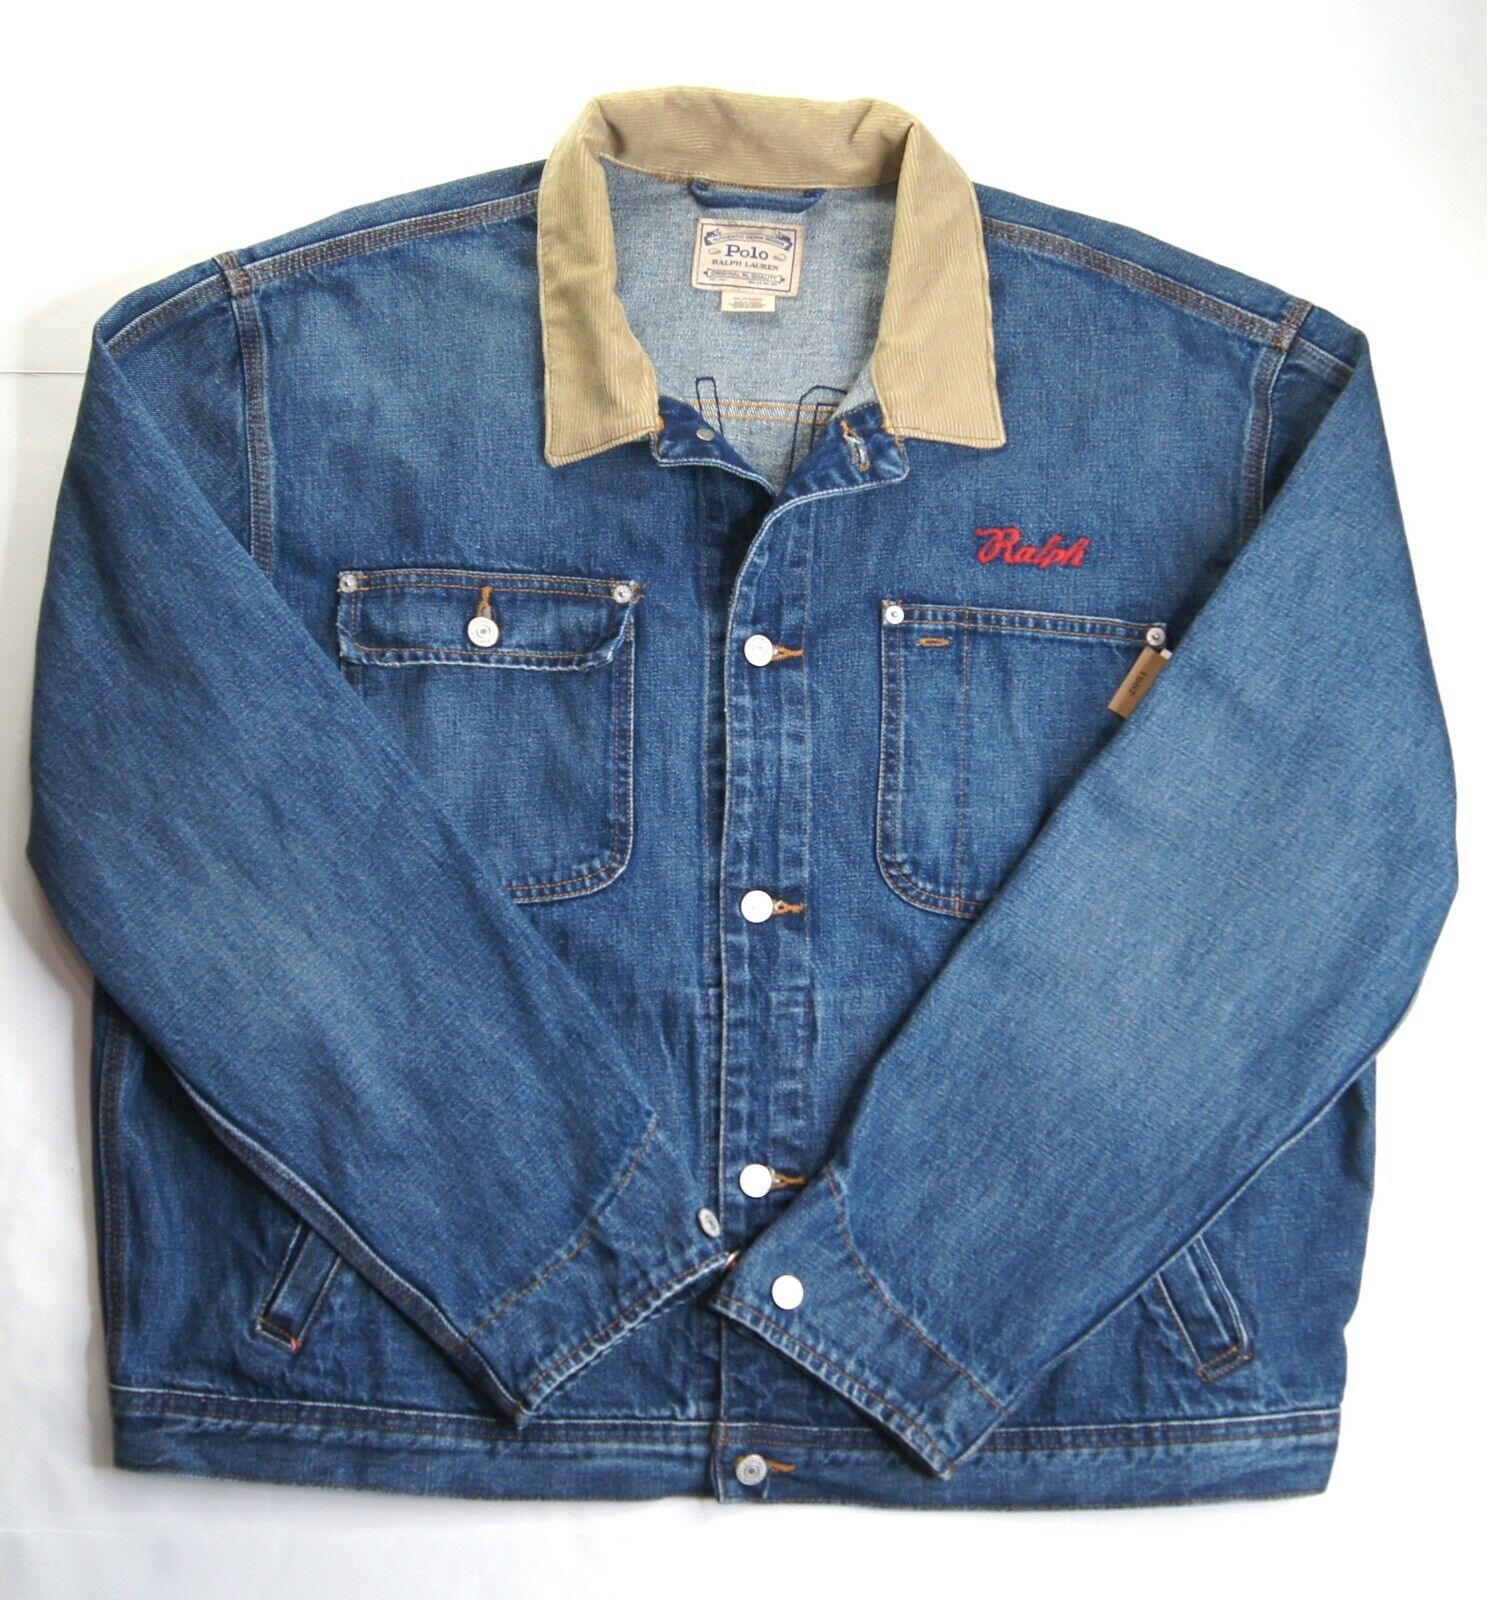 Pre-owned Polo Ralph Lauren Men's Big & Tall Polo 1967 Tiger Patch Blue Denim Jacket $348